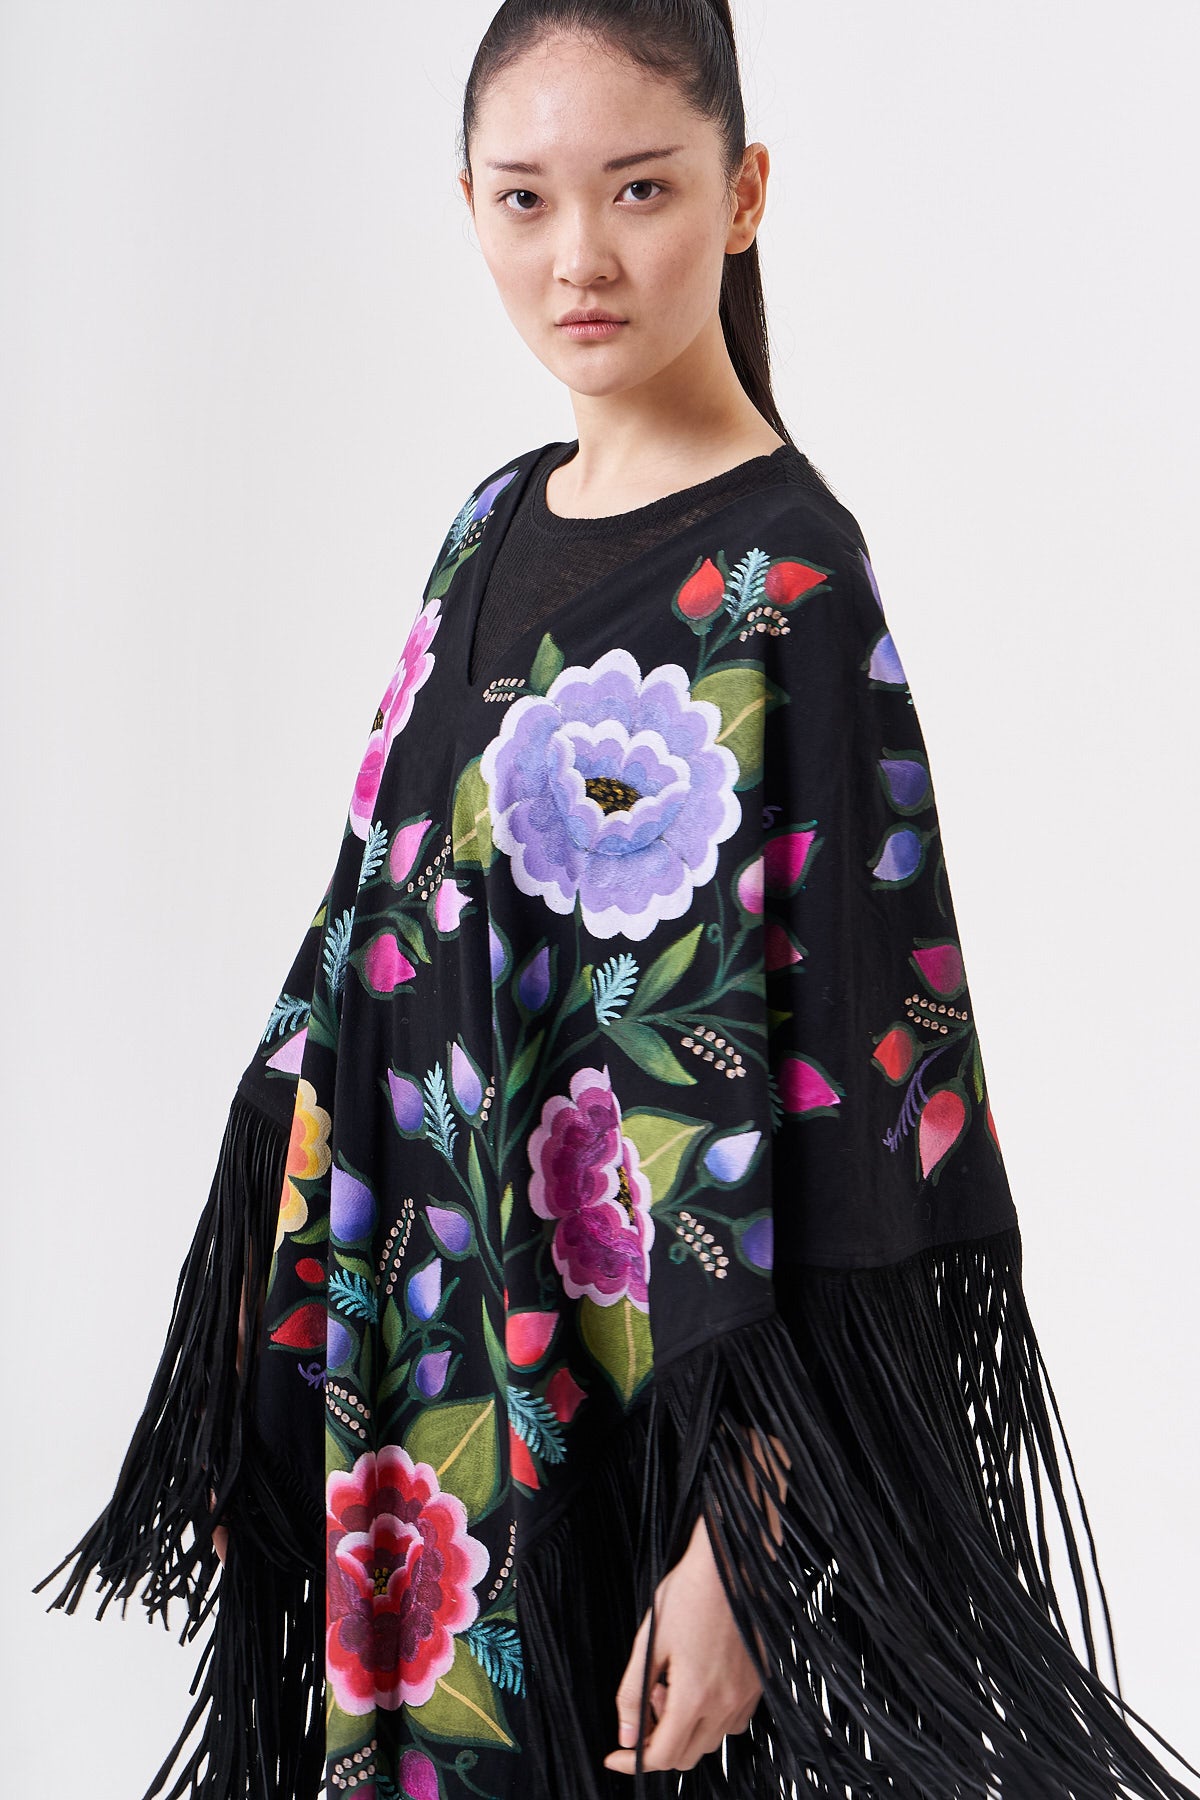 LONG HAND-PAINTED PONCHO WITH SUEDE FRINGE